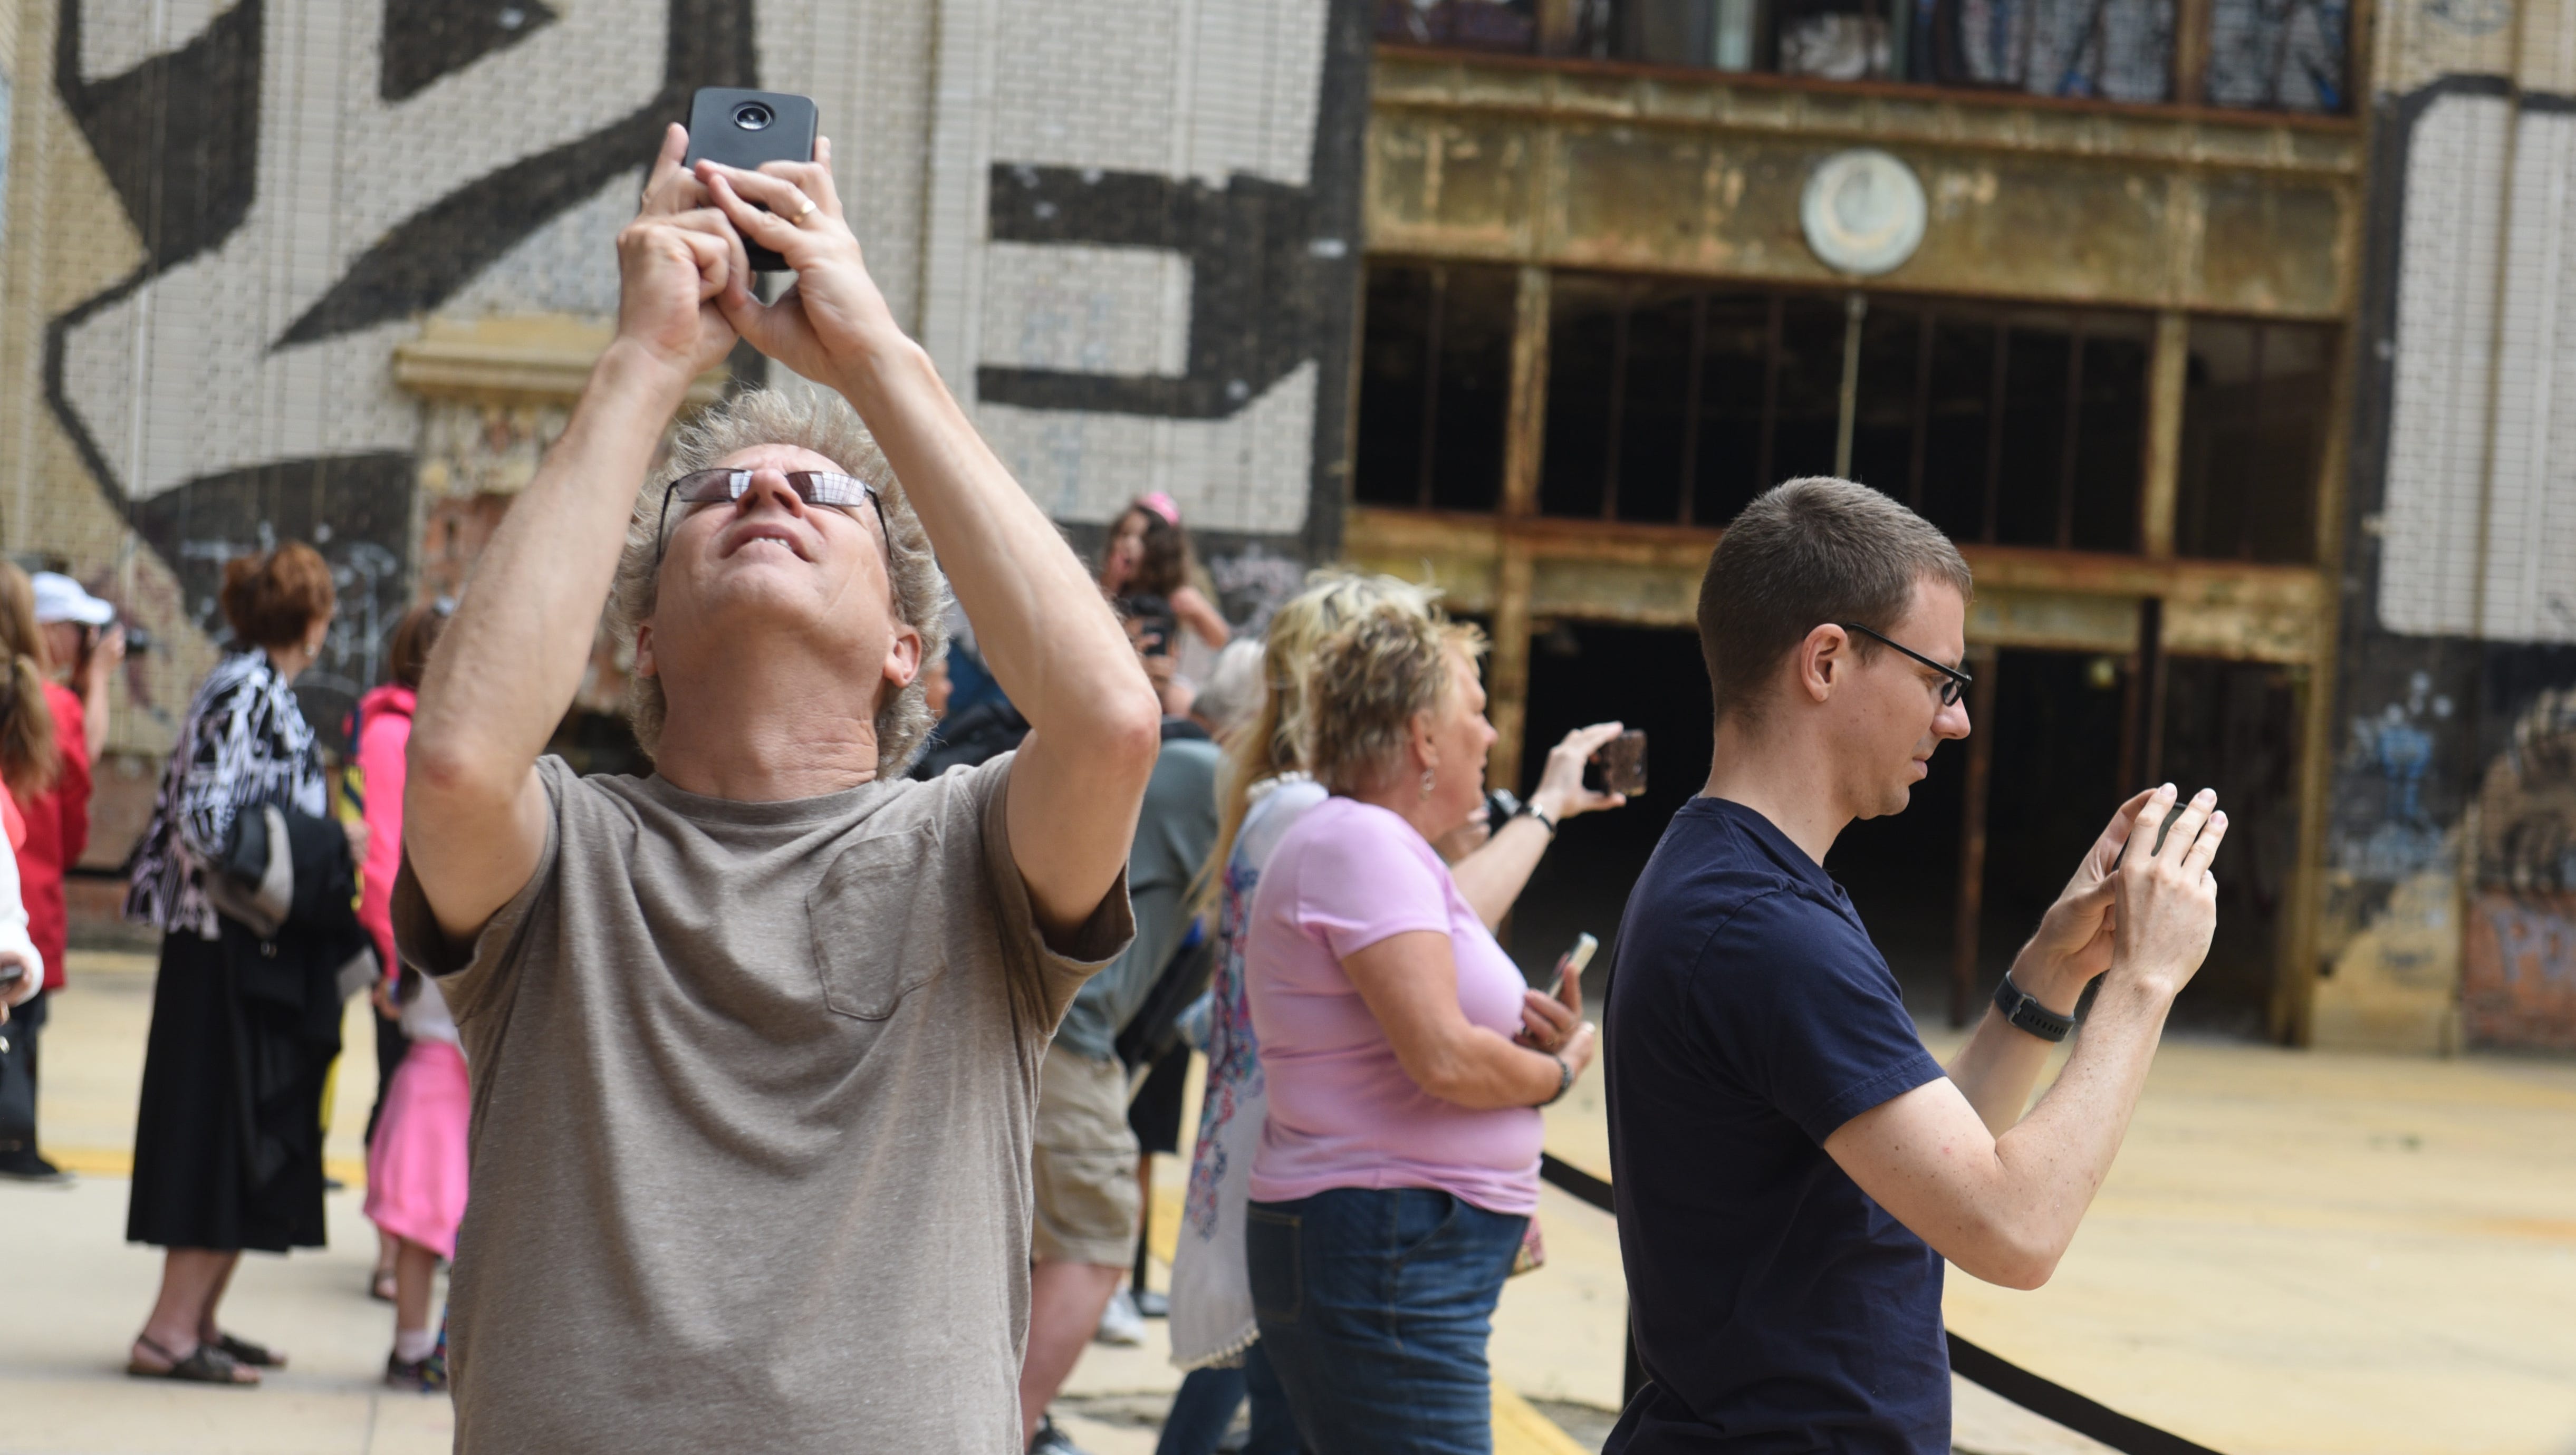 People use their phones to take photographs in the concourse during a public tour of the Michigan Central Train Depot .